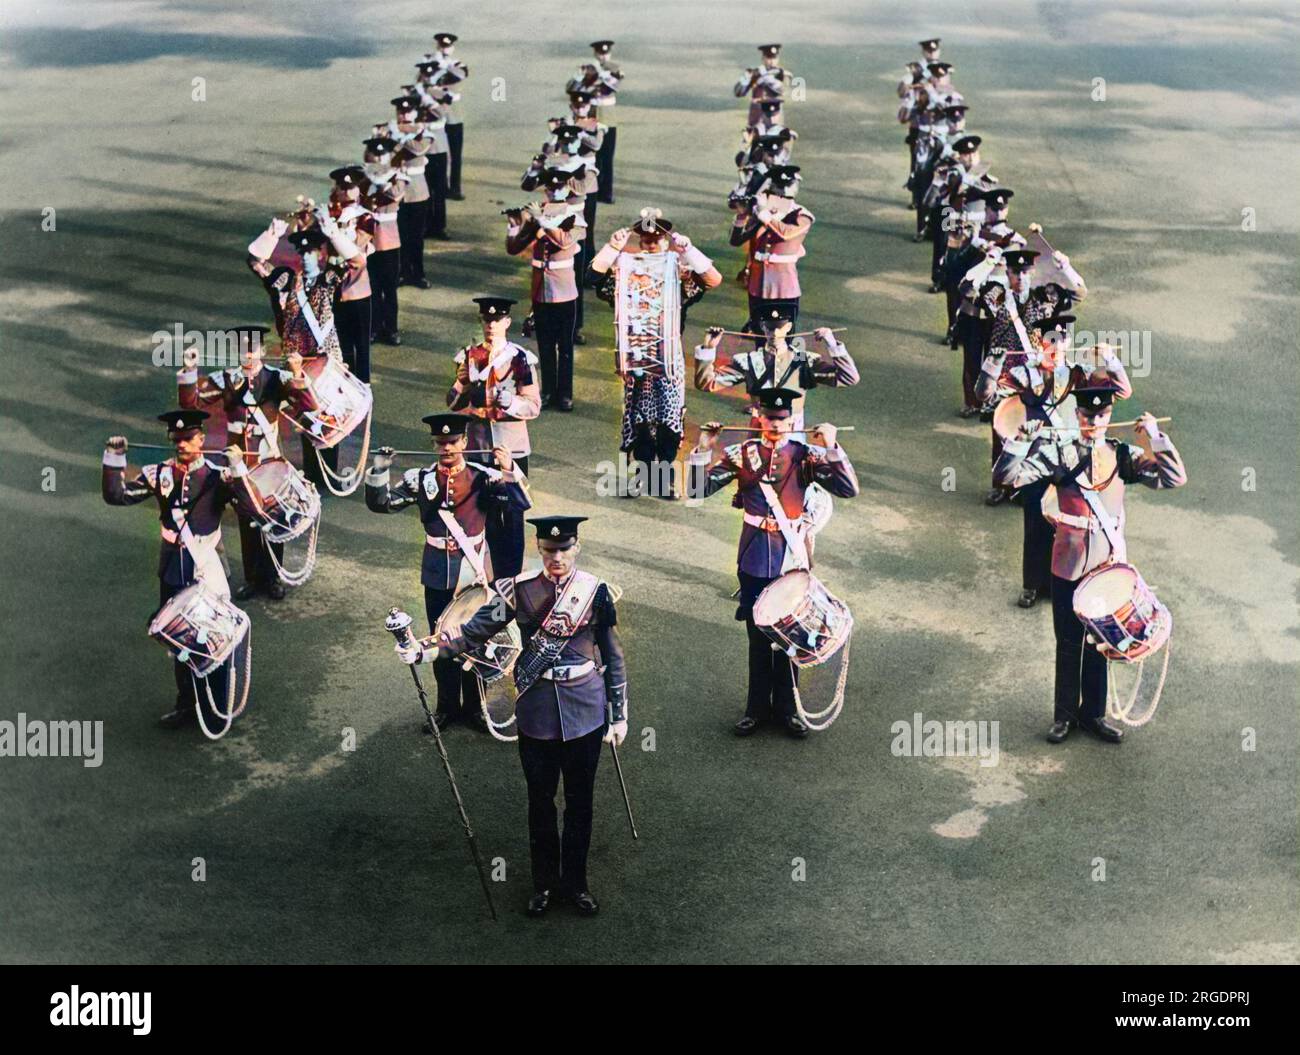 A military band on the parade ground, beating their drums. Stock Photo